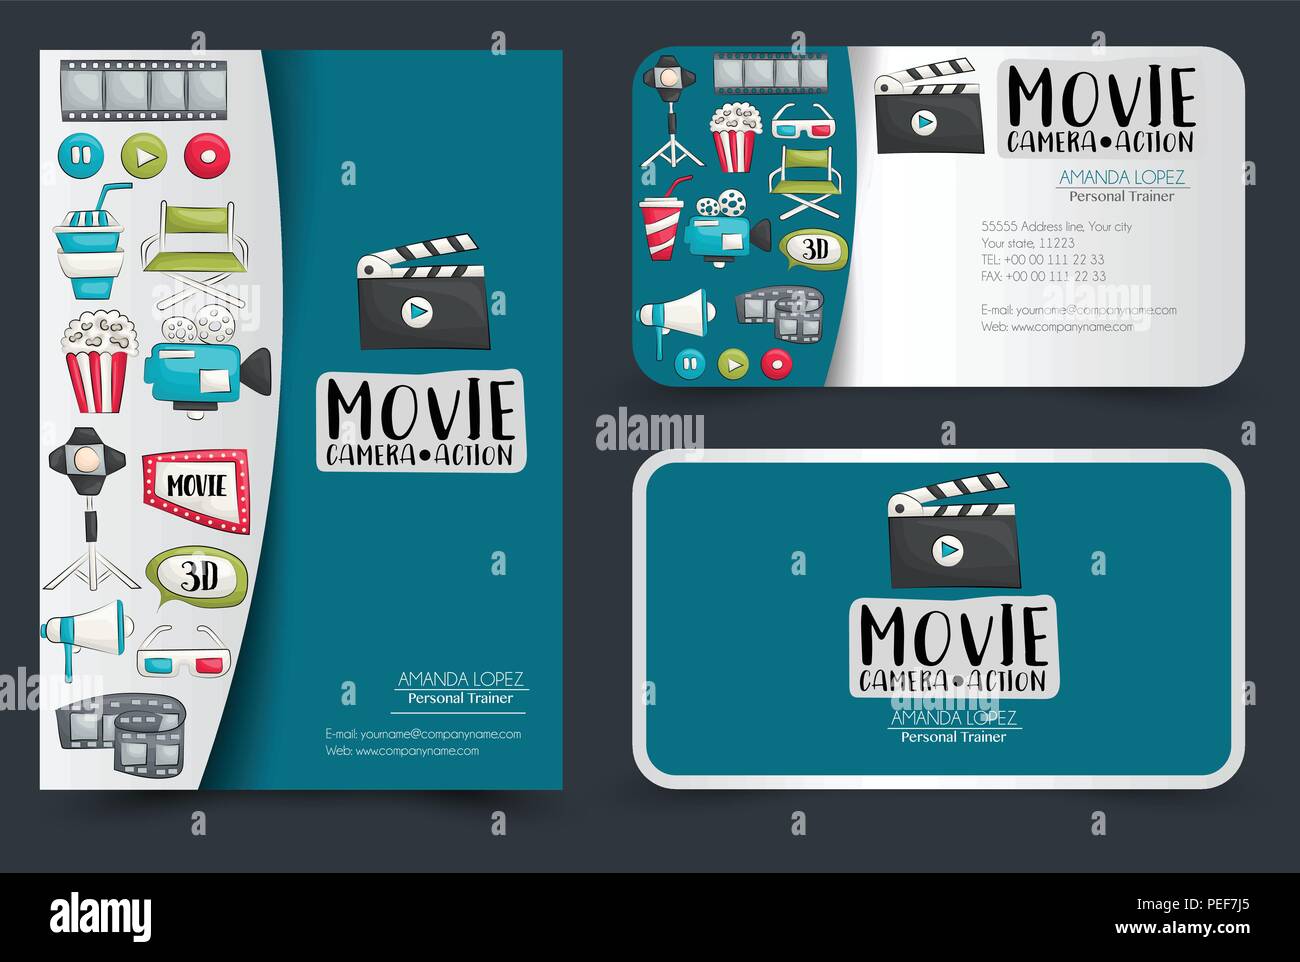 Movie cinema corporate identity design set. Flyer and business cards. Vector illustrator. Stock Vector